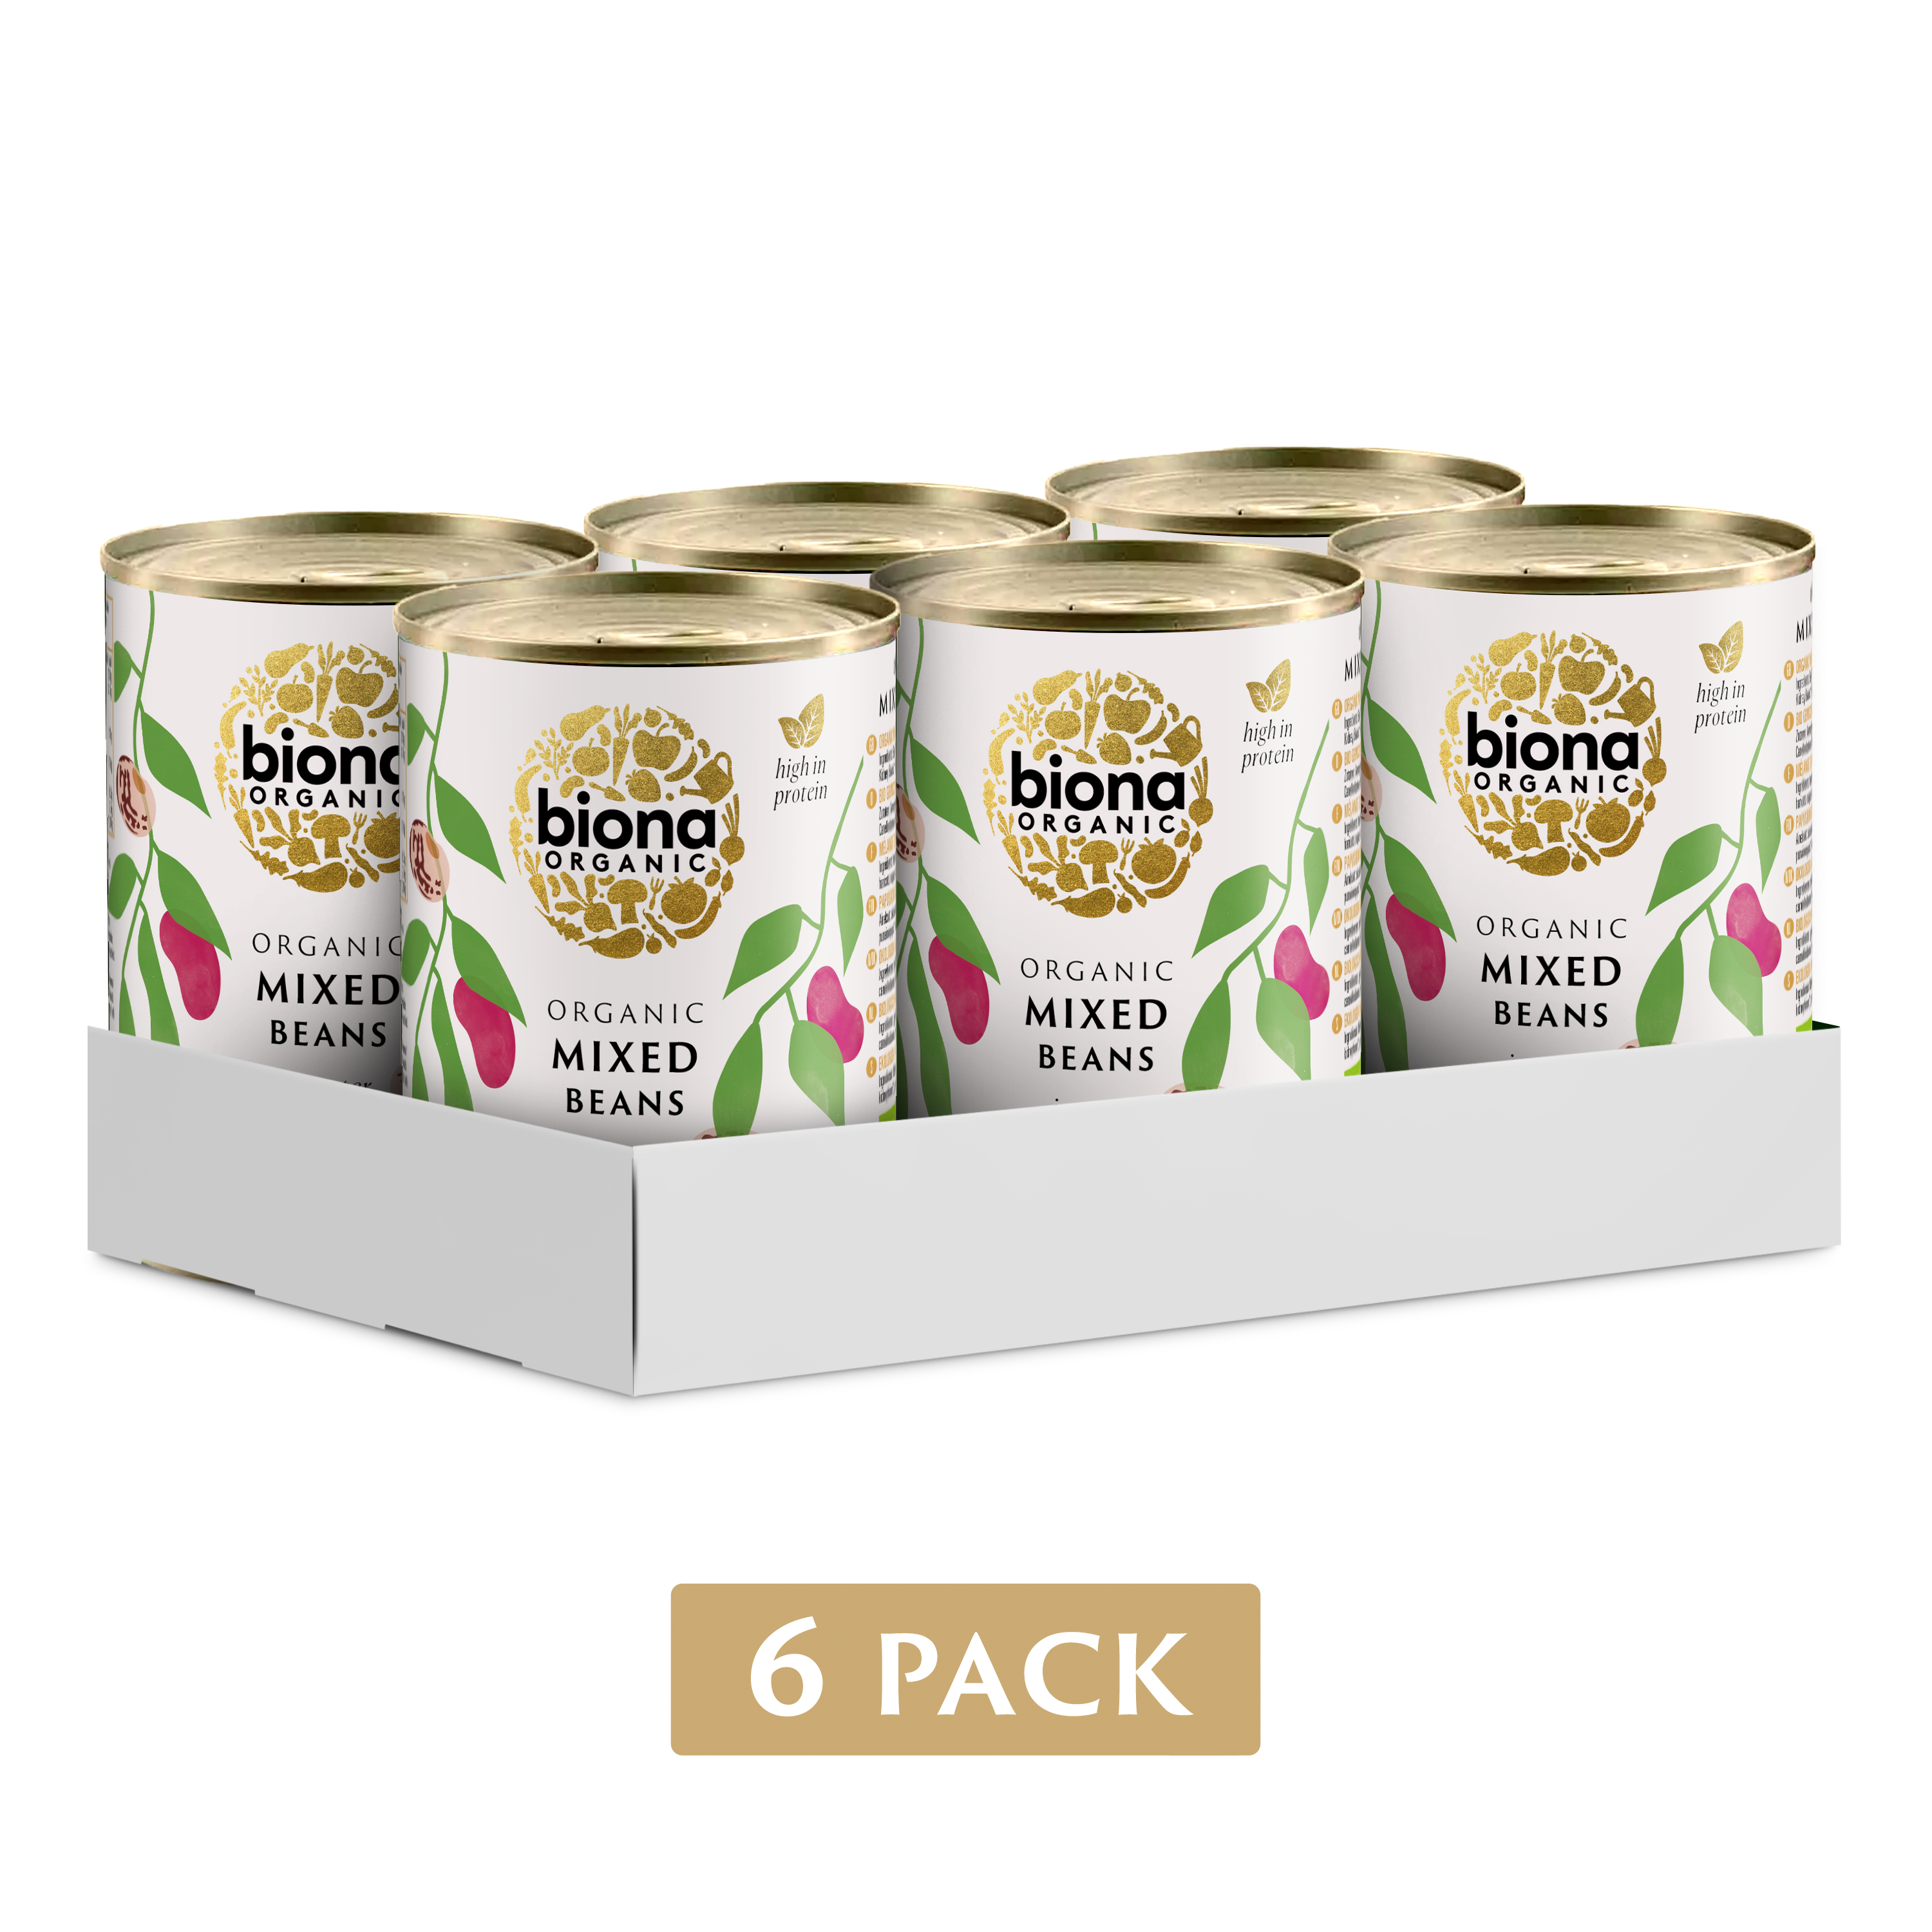 MIXED BEANS - 6 PACK